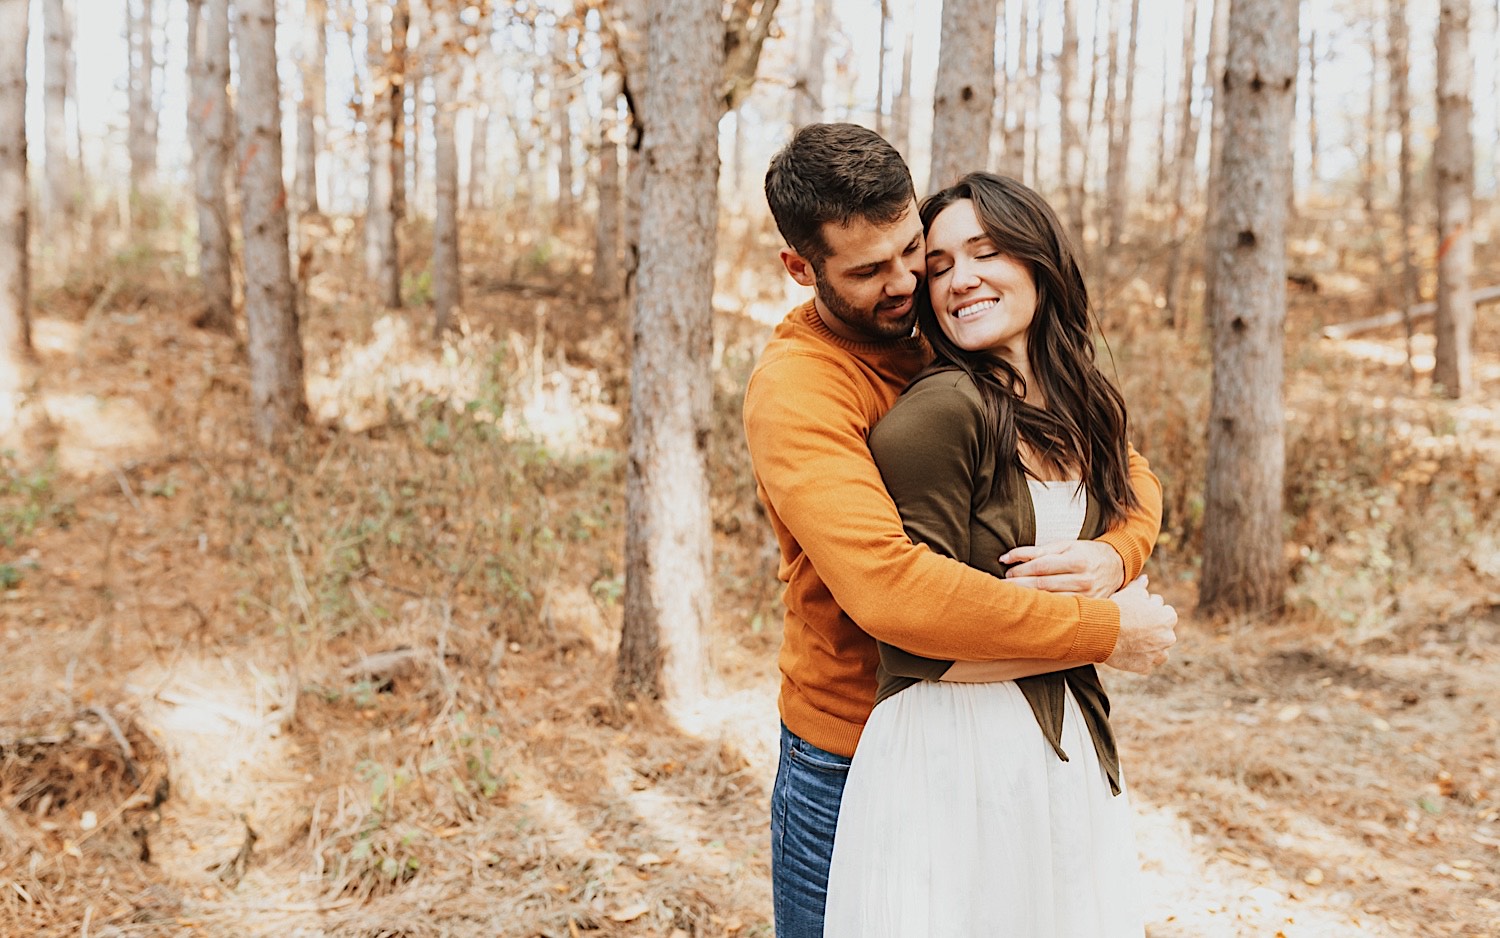 A woman smiles with her eyes closed as a man hugs her from behind while they stand in a forest with fall leaves on the ground during their engagement session in Minnesota